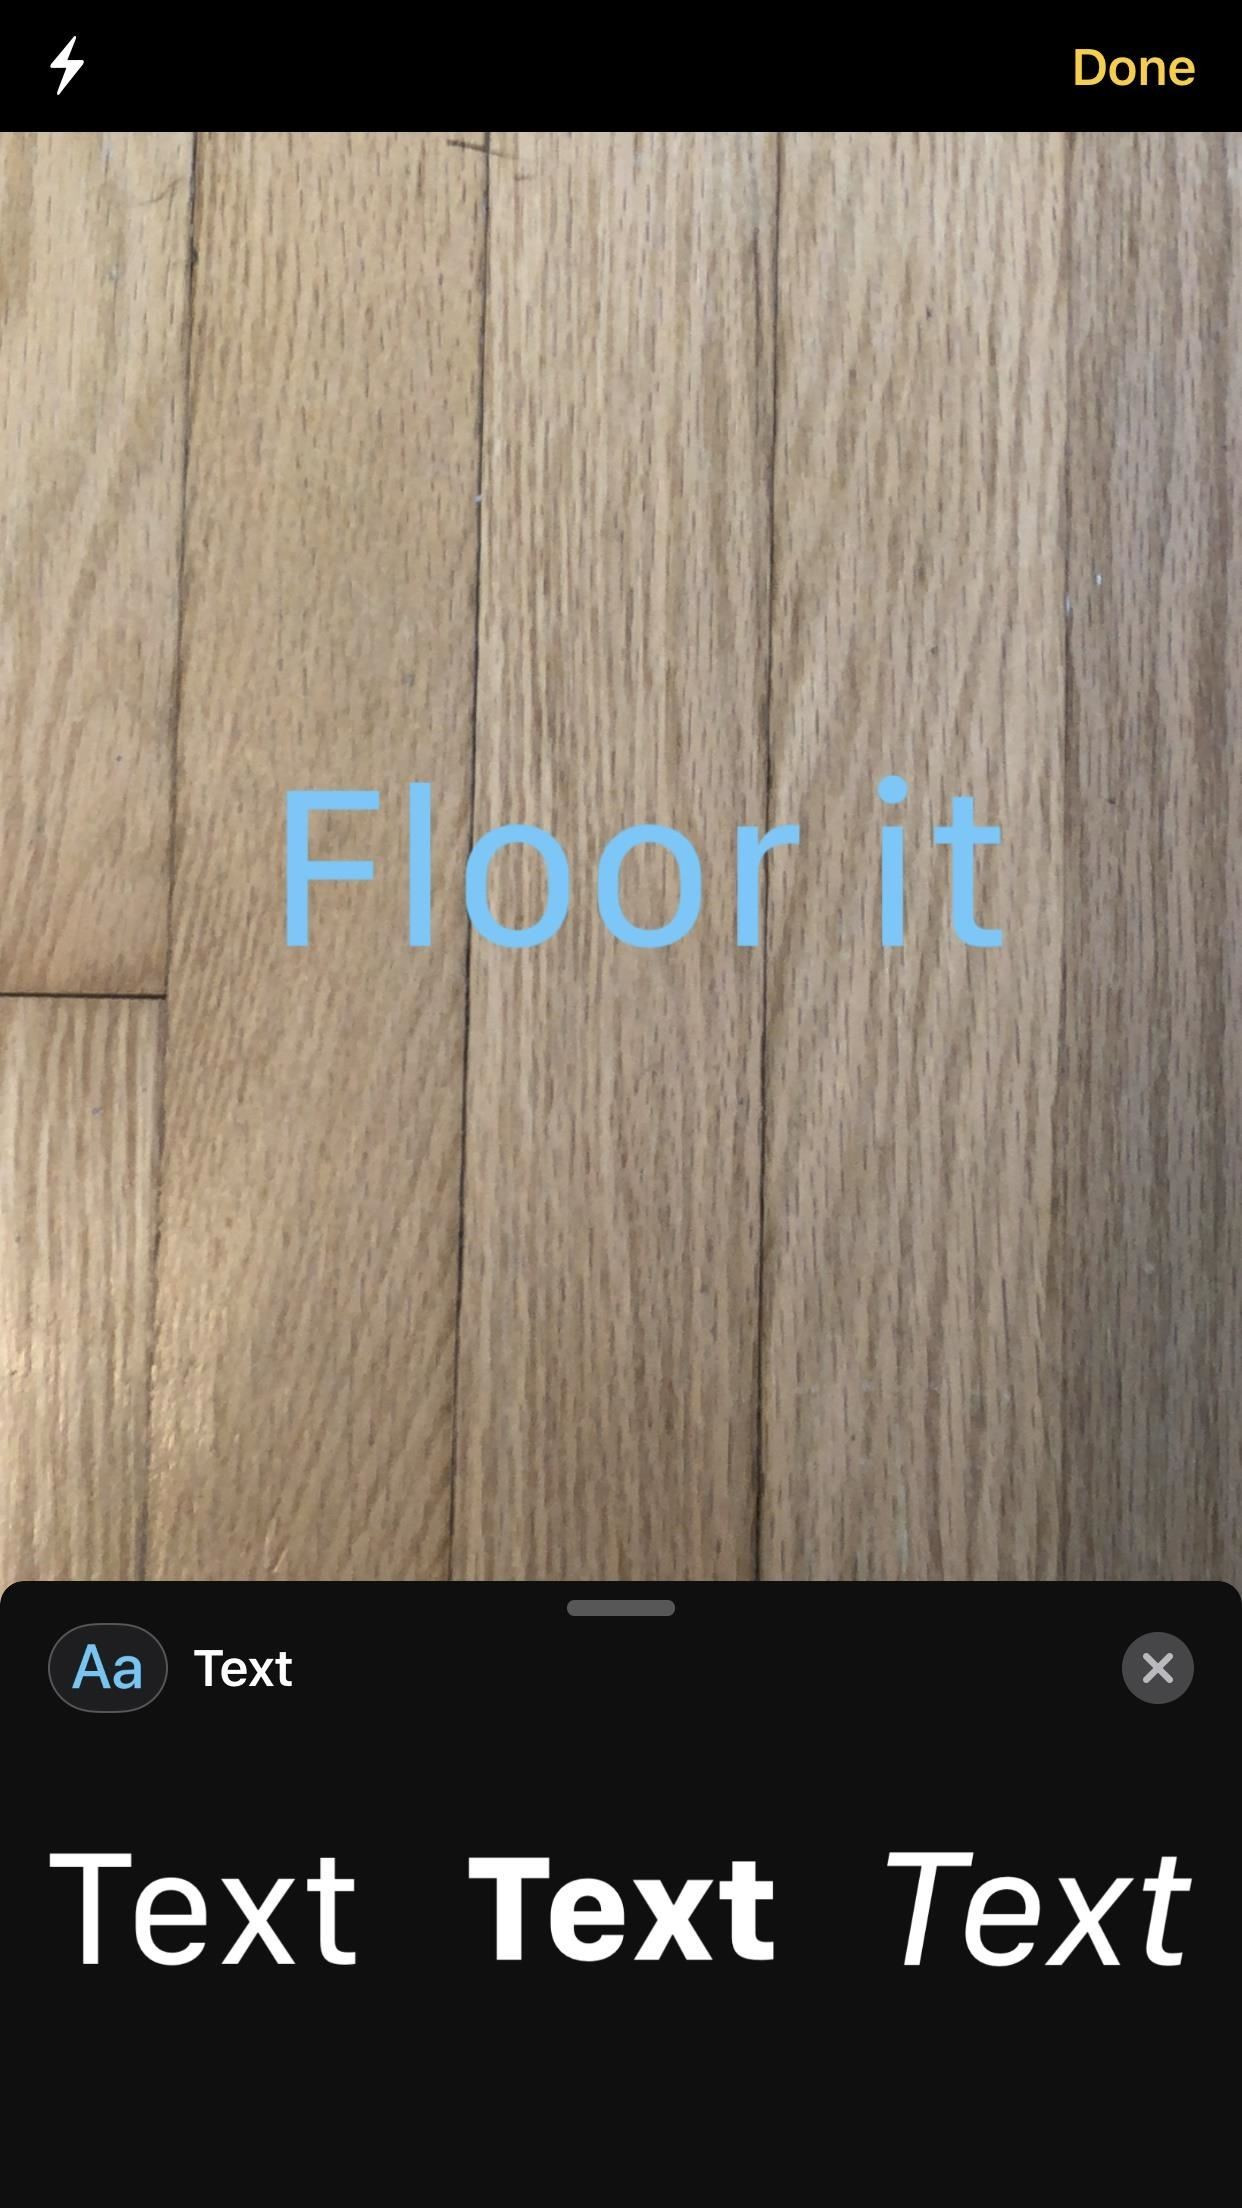 r d hardwood floors of 100 coolest new ios 12 features you didnt know about a ios pertaining to 44and there is text support for the messages camera